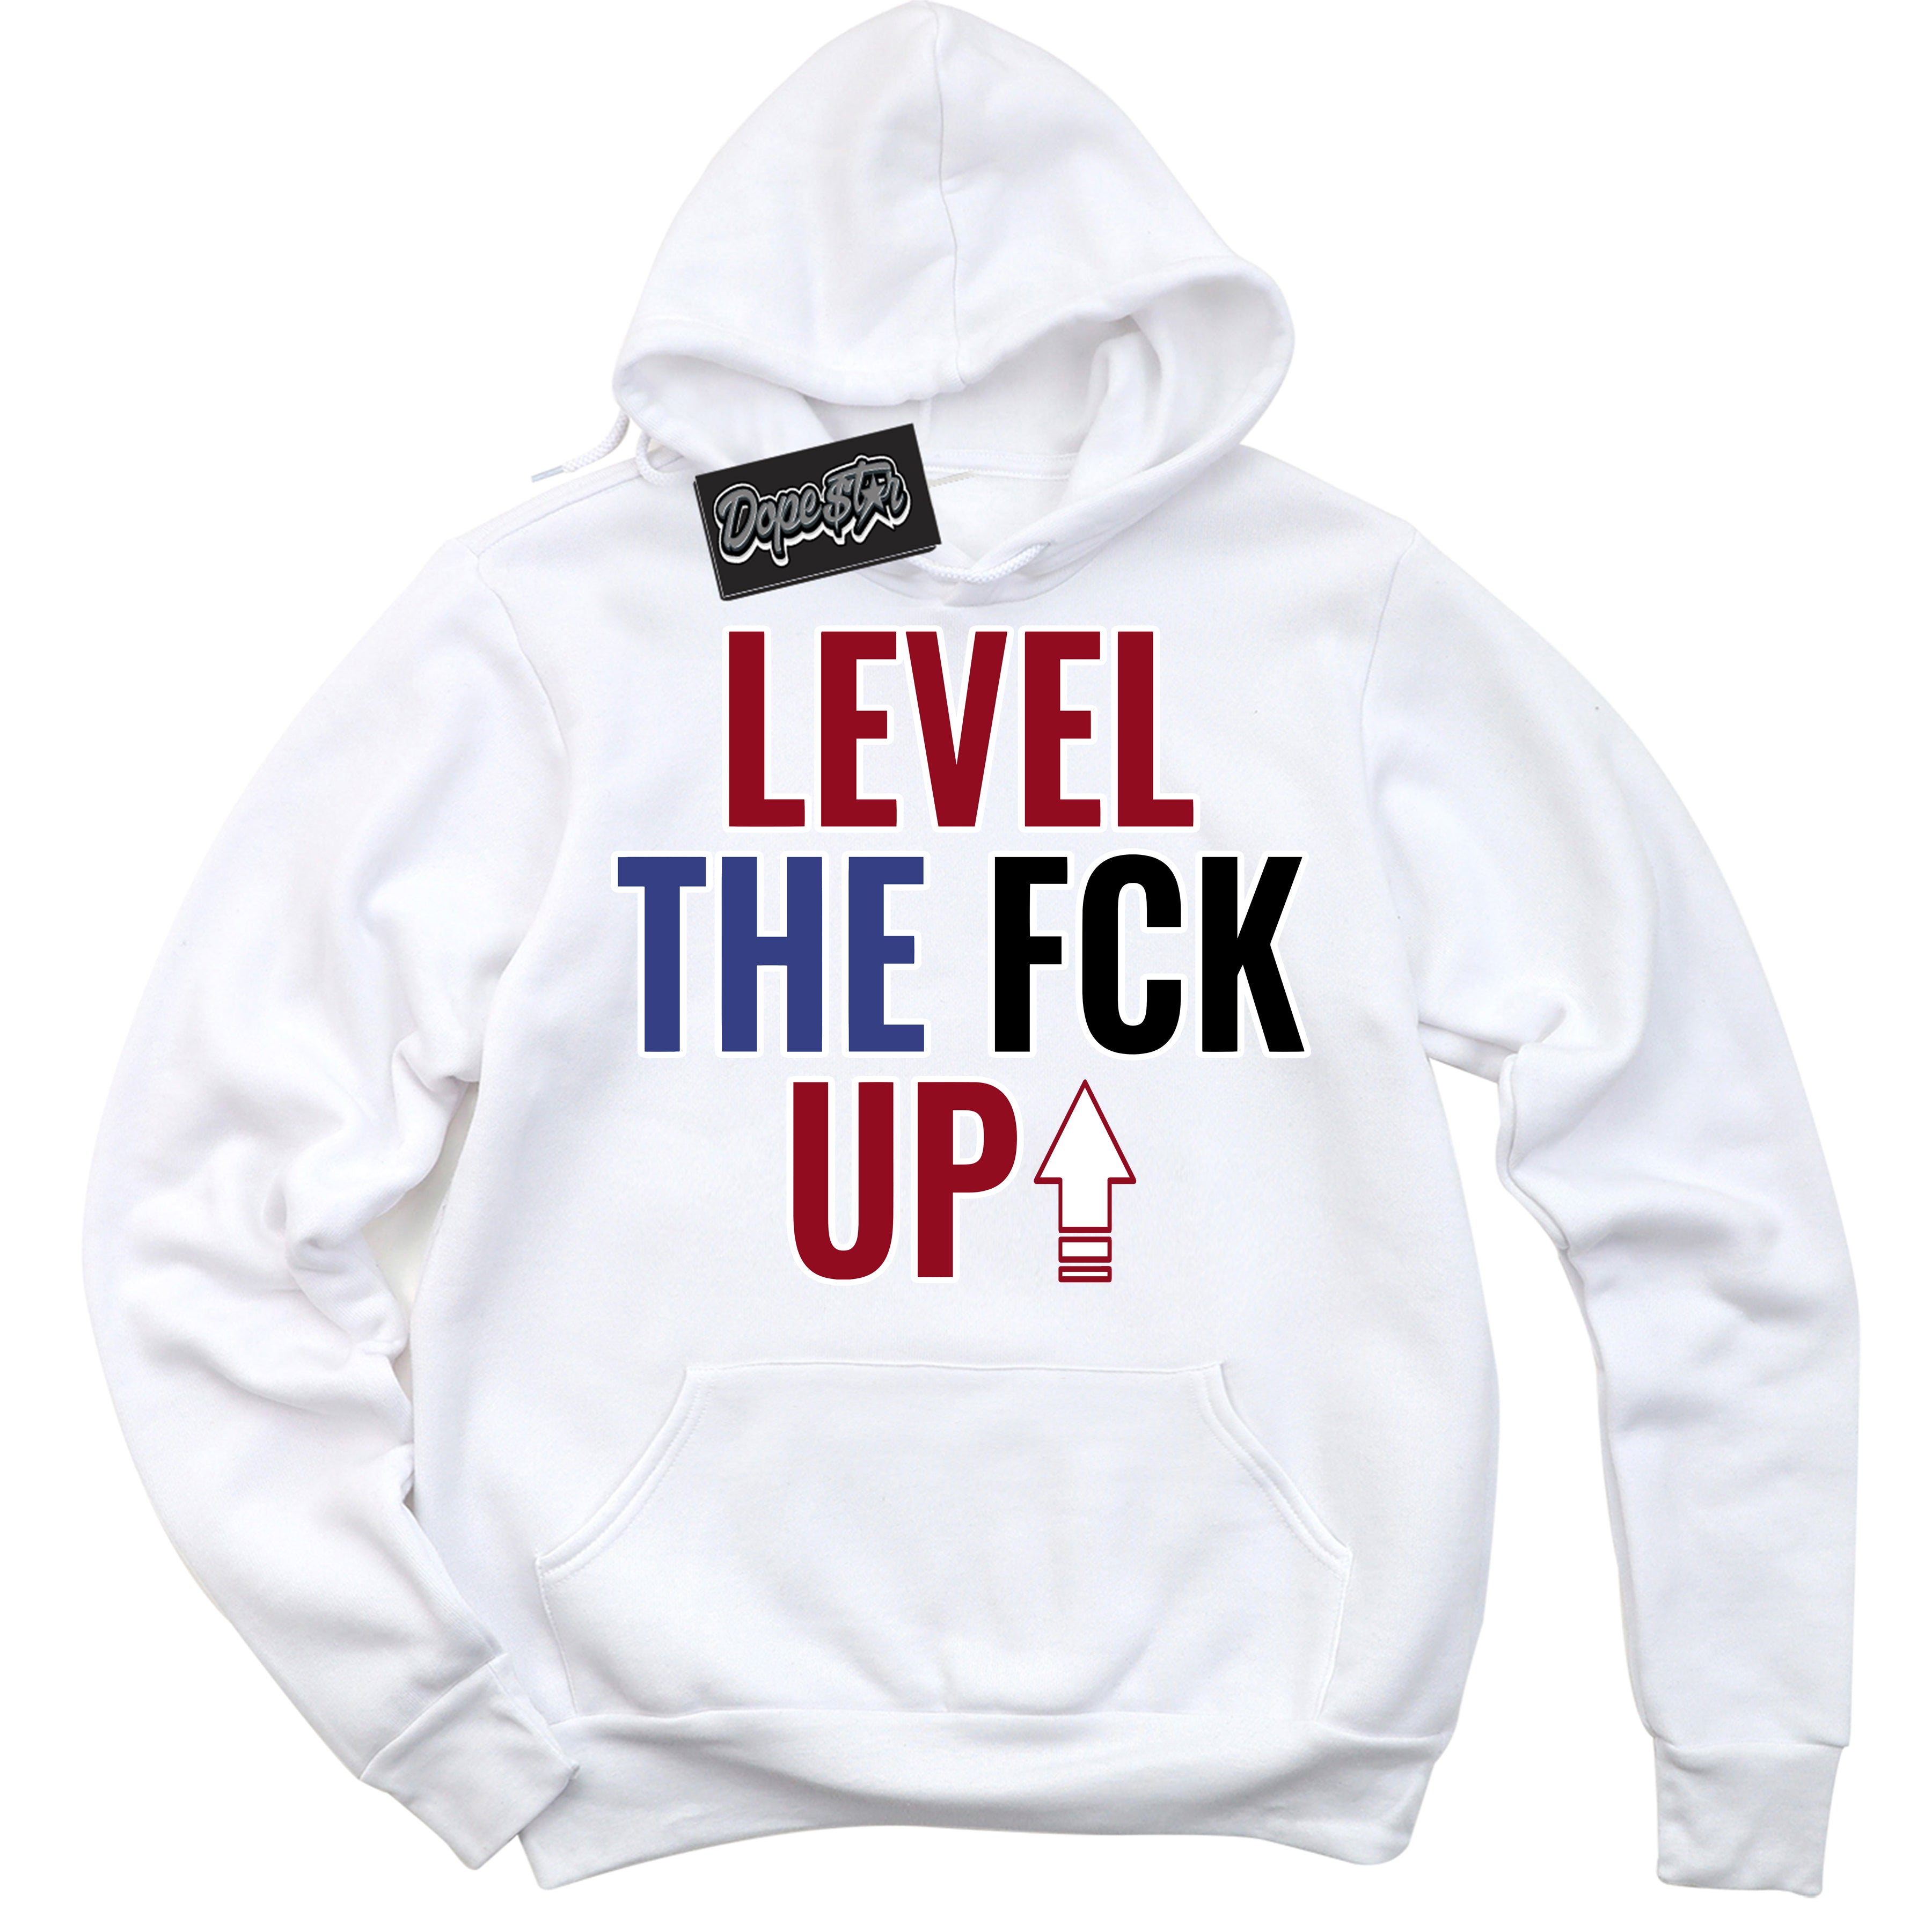 Cool White Hoodie with “ Level The Fck Up ”  design that Perfectly Matches Playoffs 8s Sneakers.